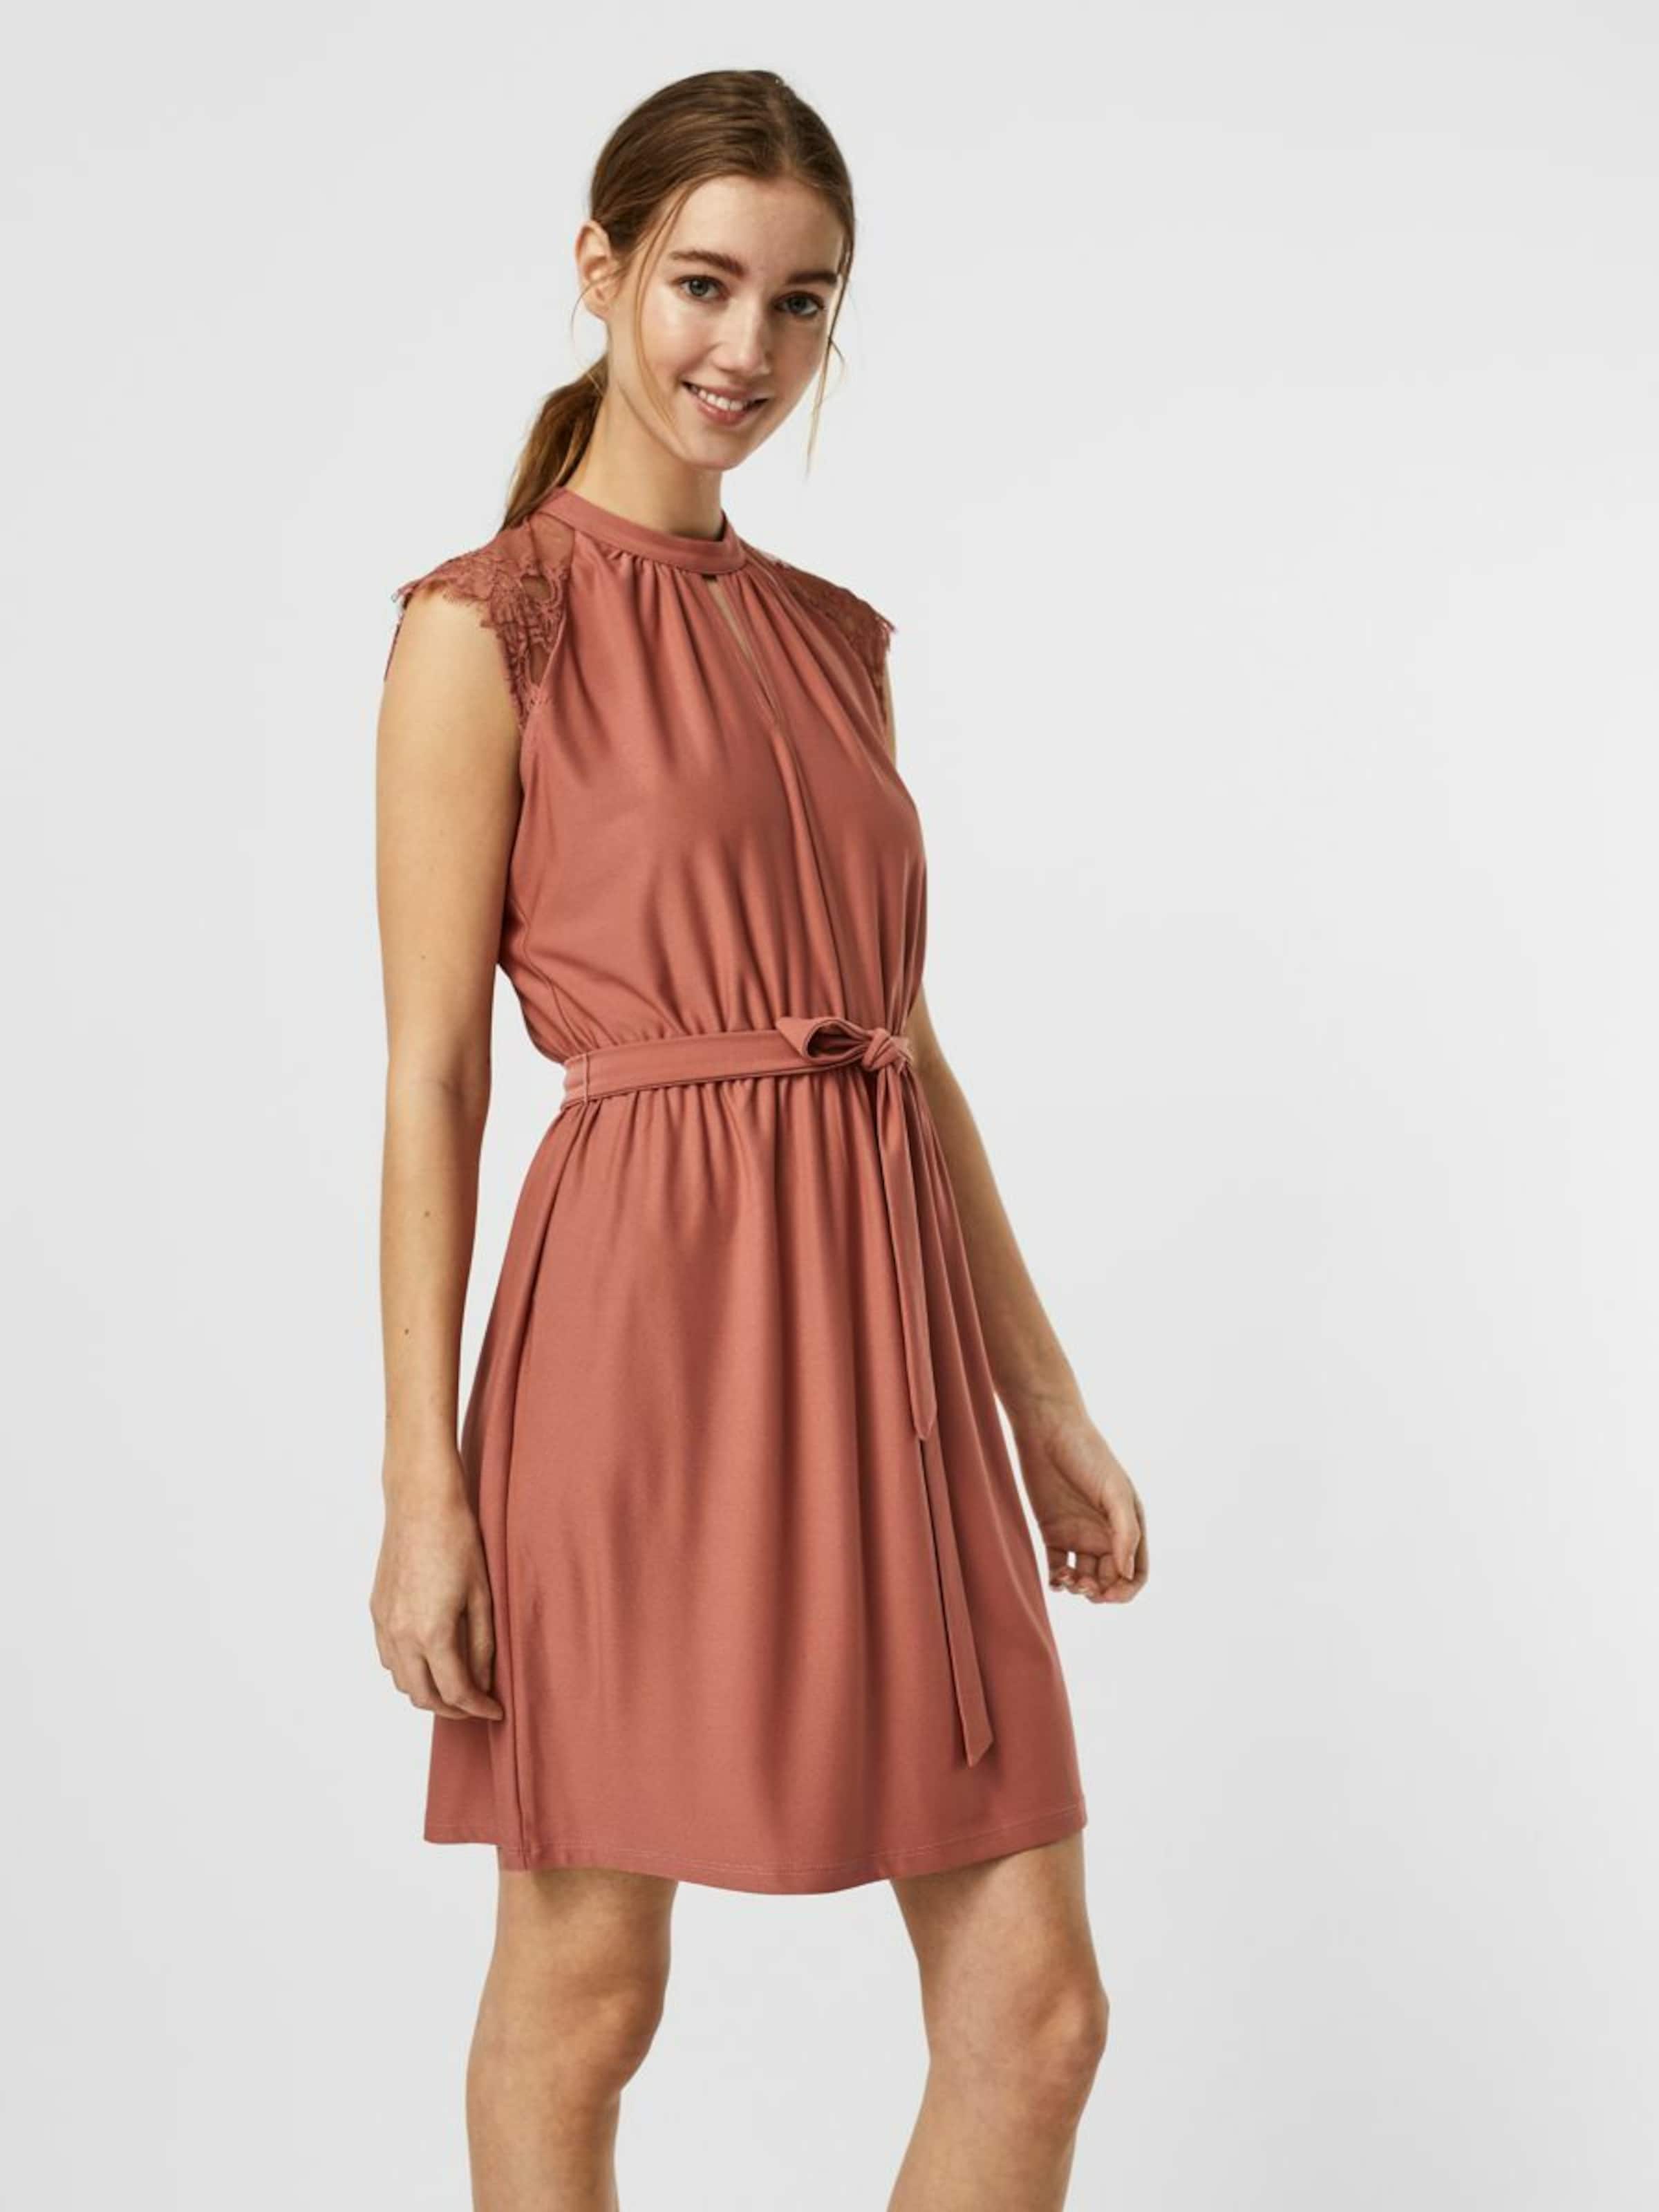 VERO ABOUT | \'MILLA\' YOU in Pink MODA Dress